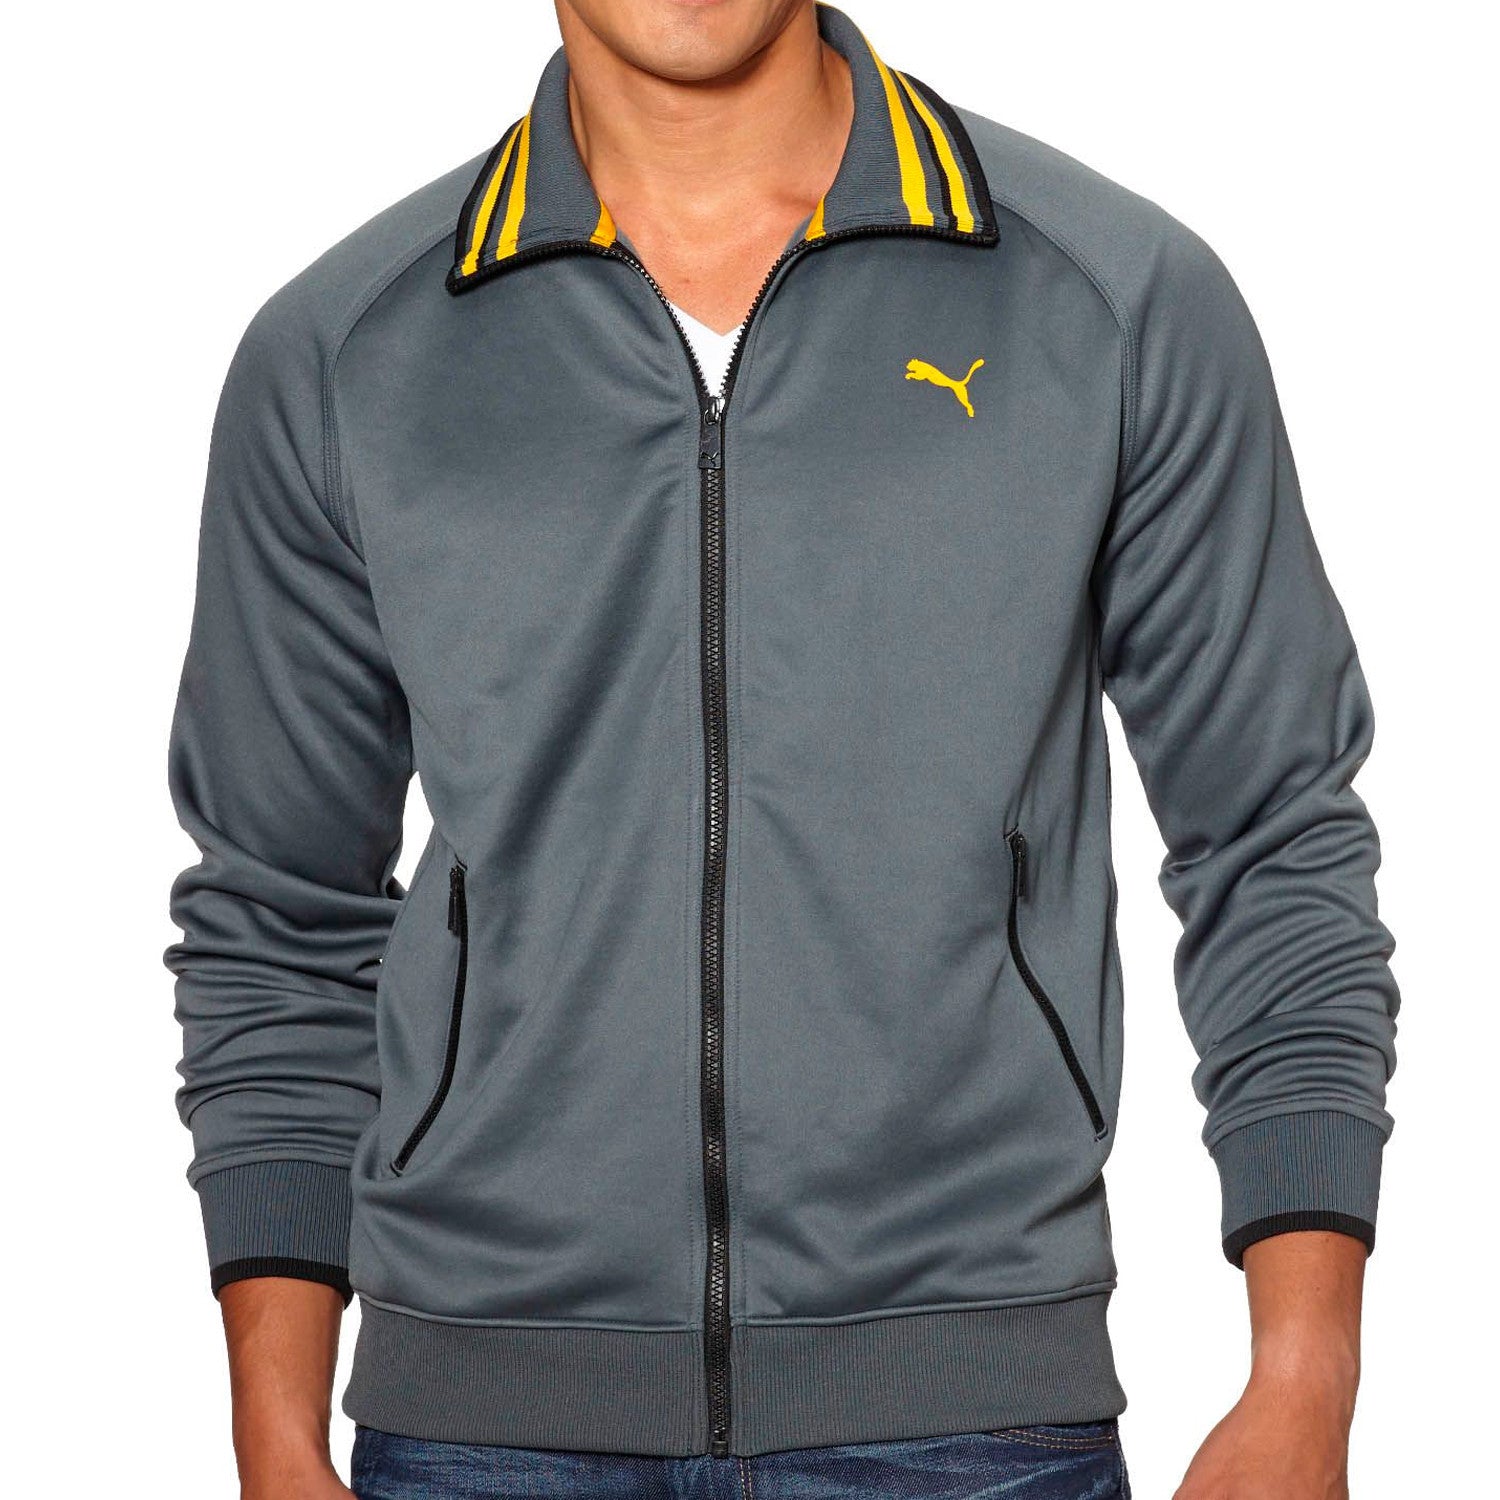 Puma Front-Zip Track Jacket with Striped Collar - Black/Quarry - Mens ...